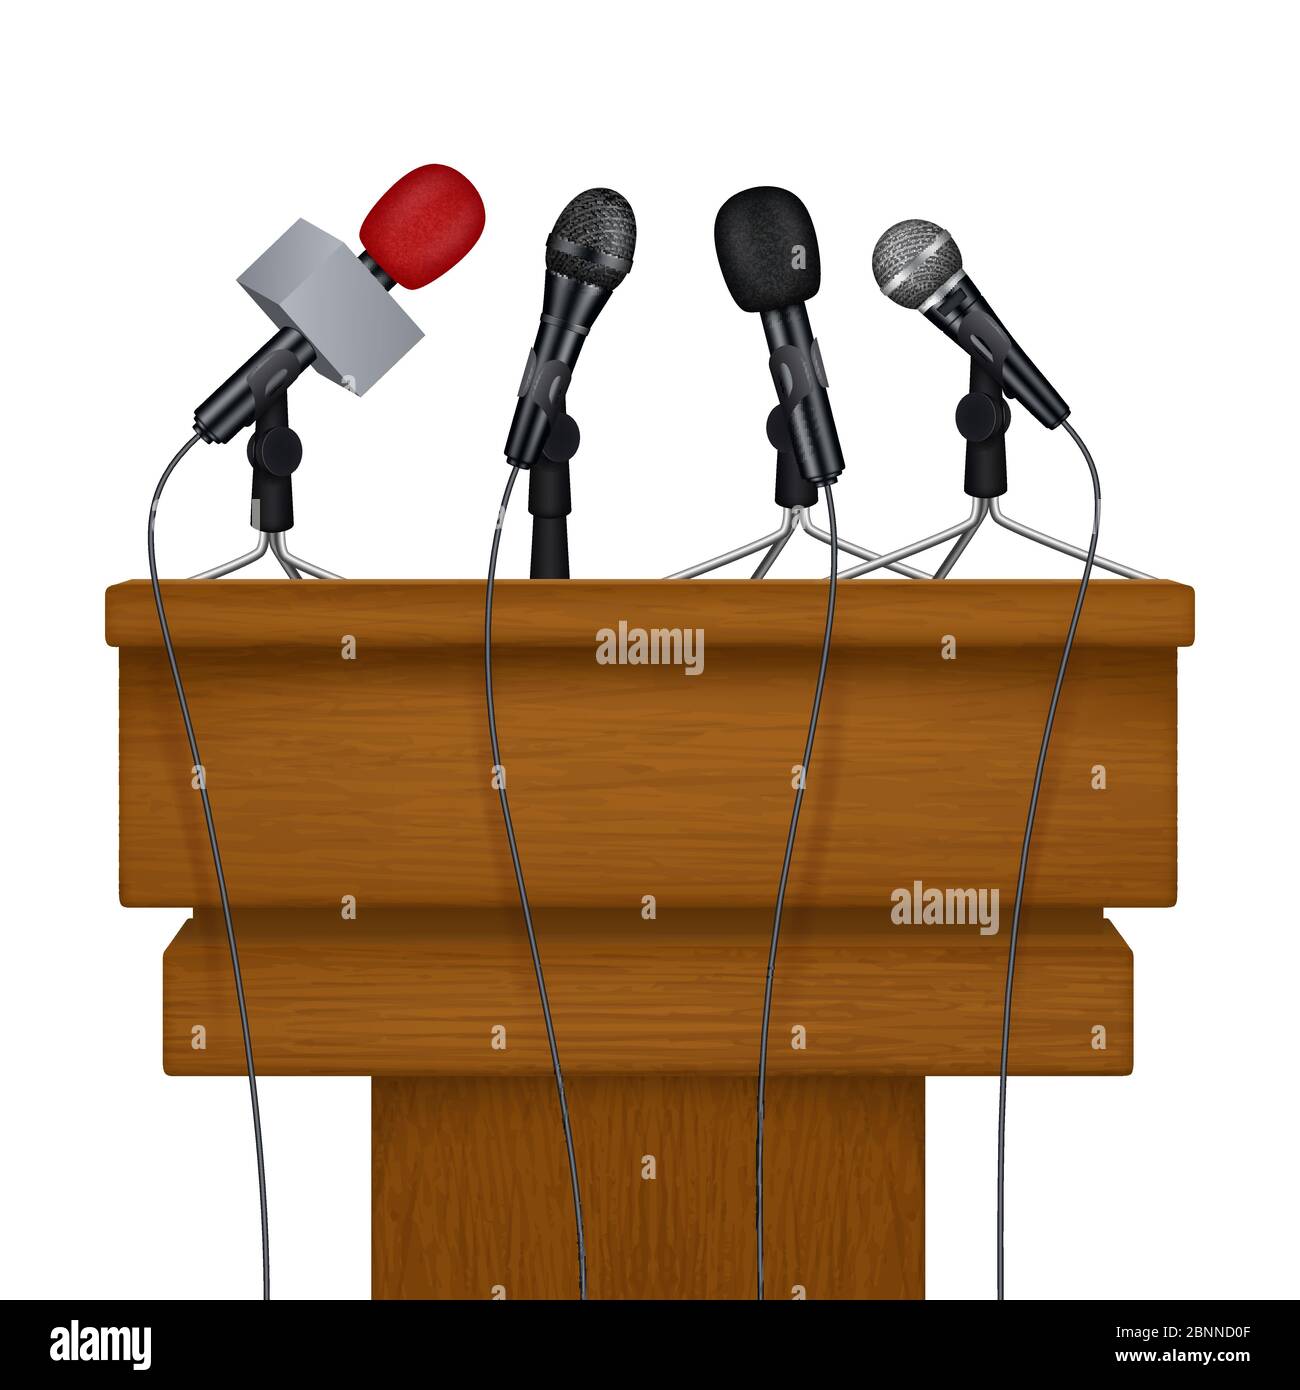 https://c8.alamy.com/comp/2BNND0F/press-conference-stage-meeting-news-media-microphones-vector-realistic-pictures-2BNND0F.jpg